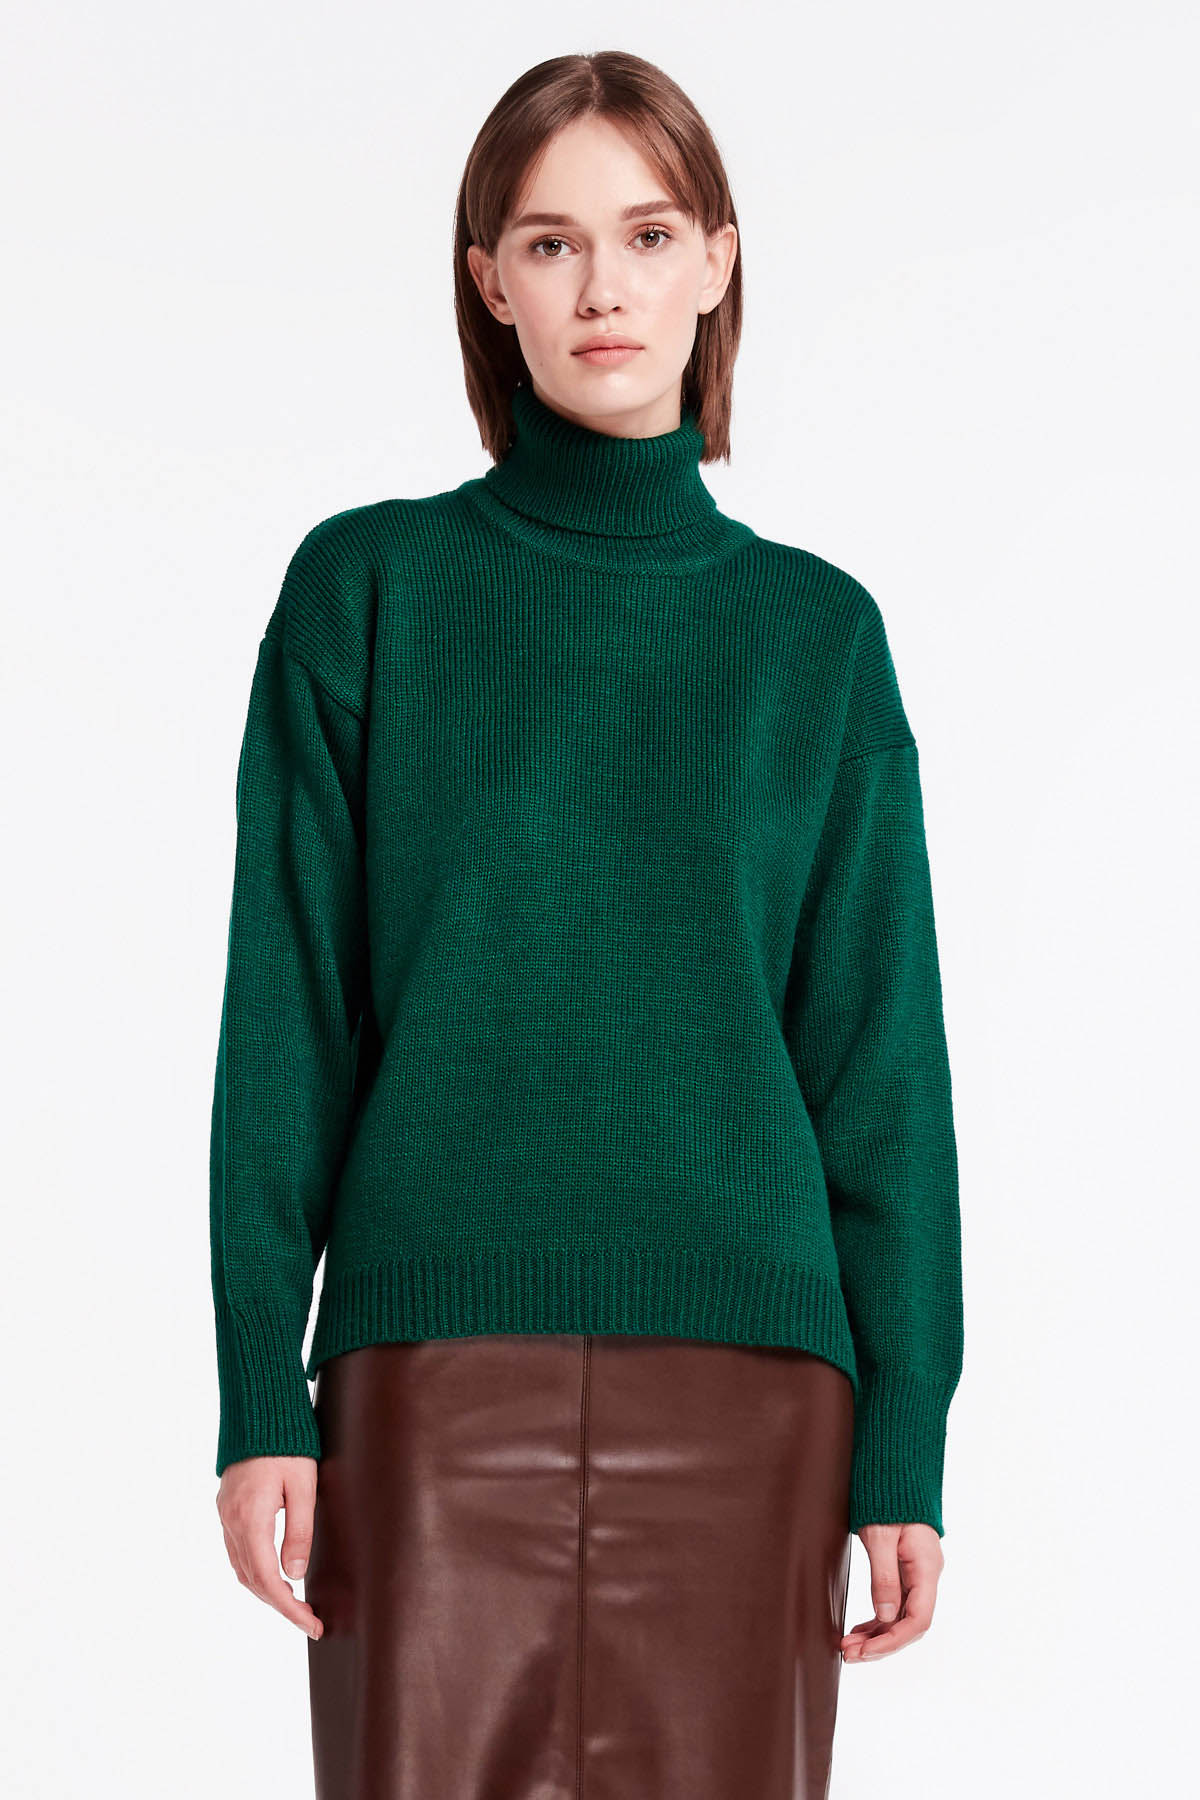 Green knit polo neck sweater, photo 1